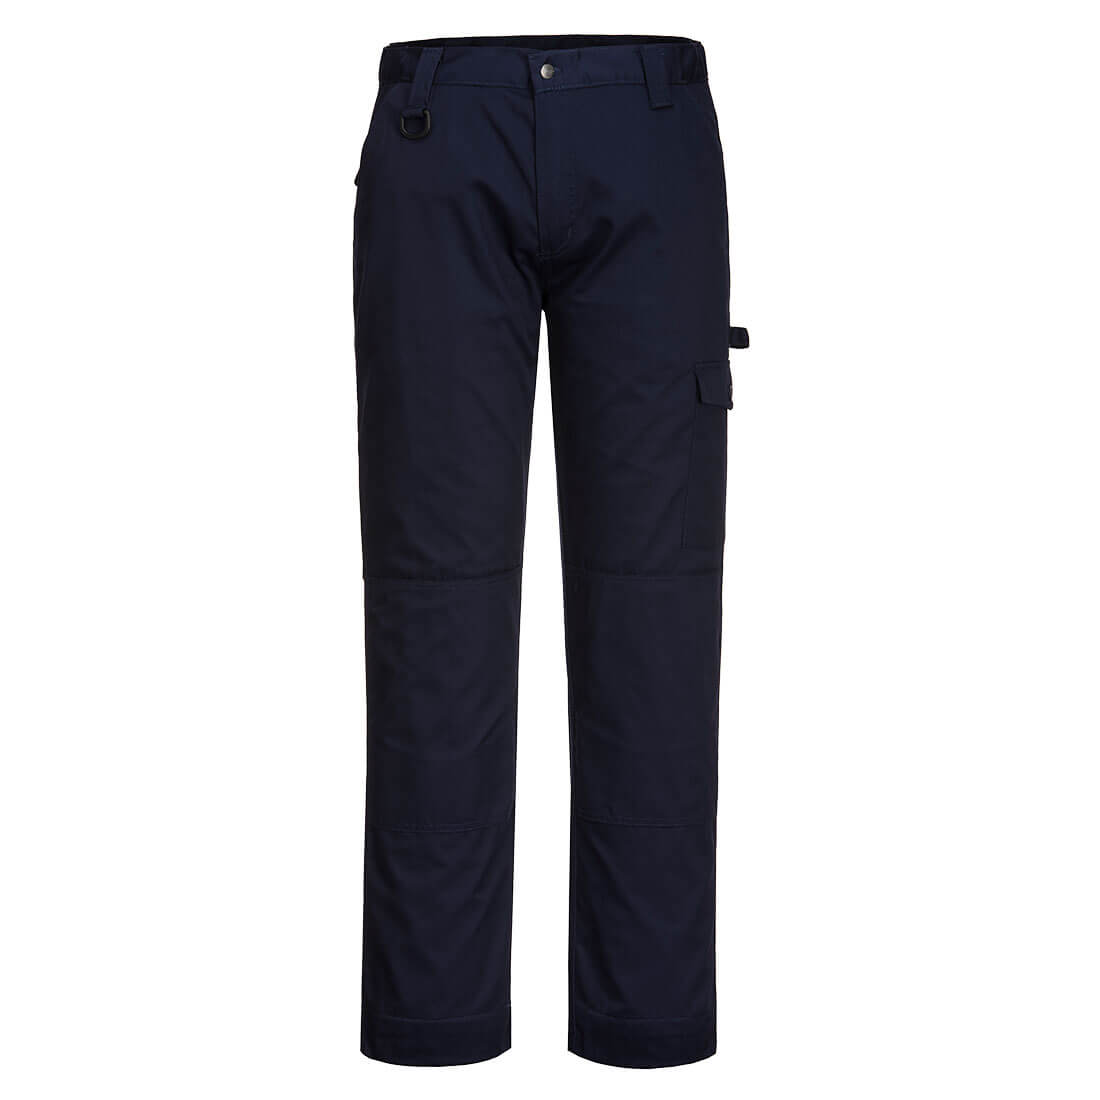 Portwest Painters Trousers Work Pants Protection India | Ubuy